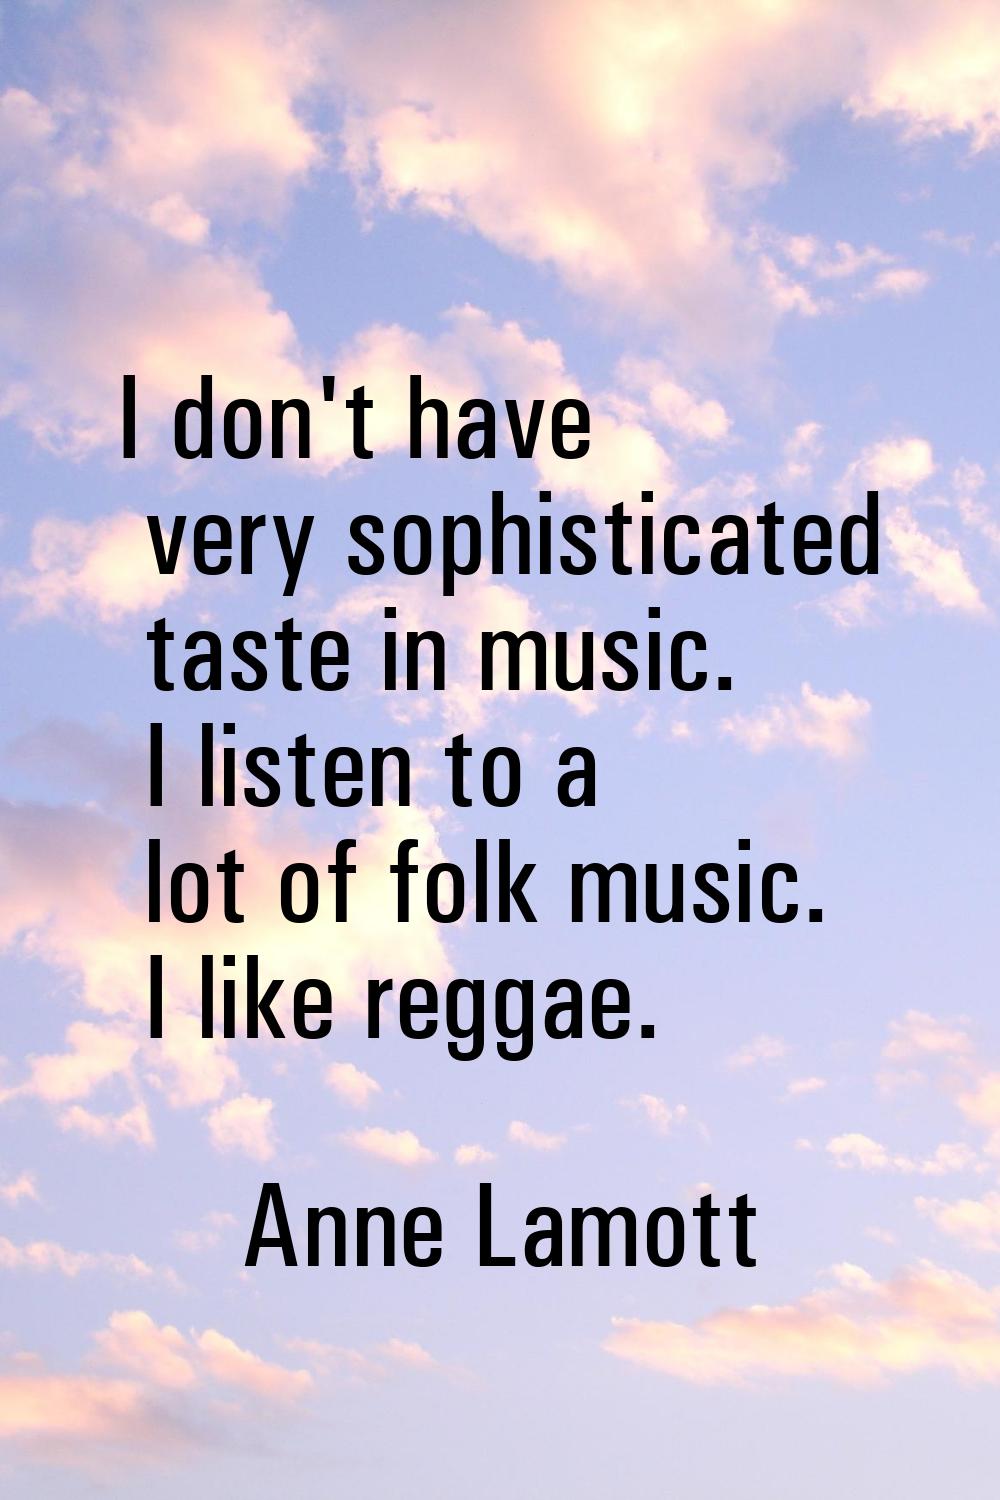 I don't have very sophisticated taste in music. I listen to a lot of folk music. I like reggae.